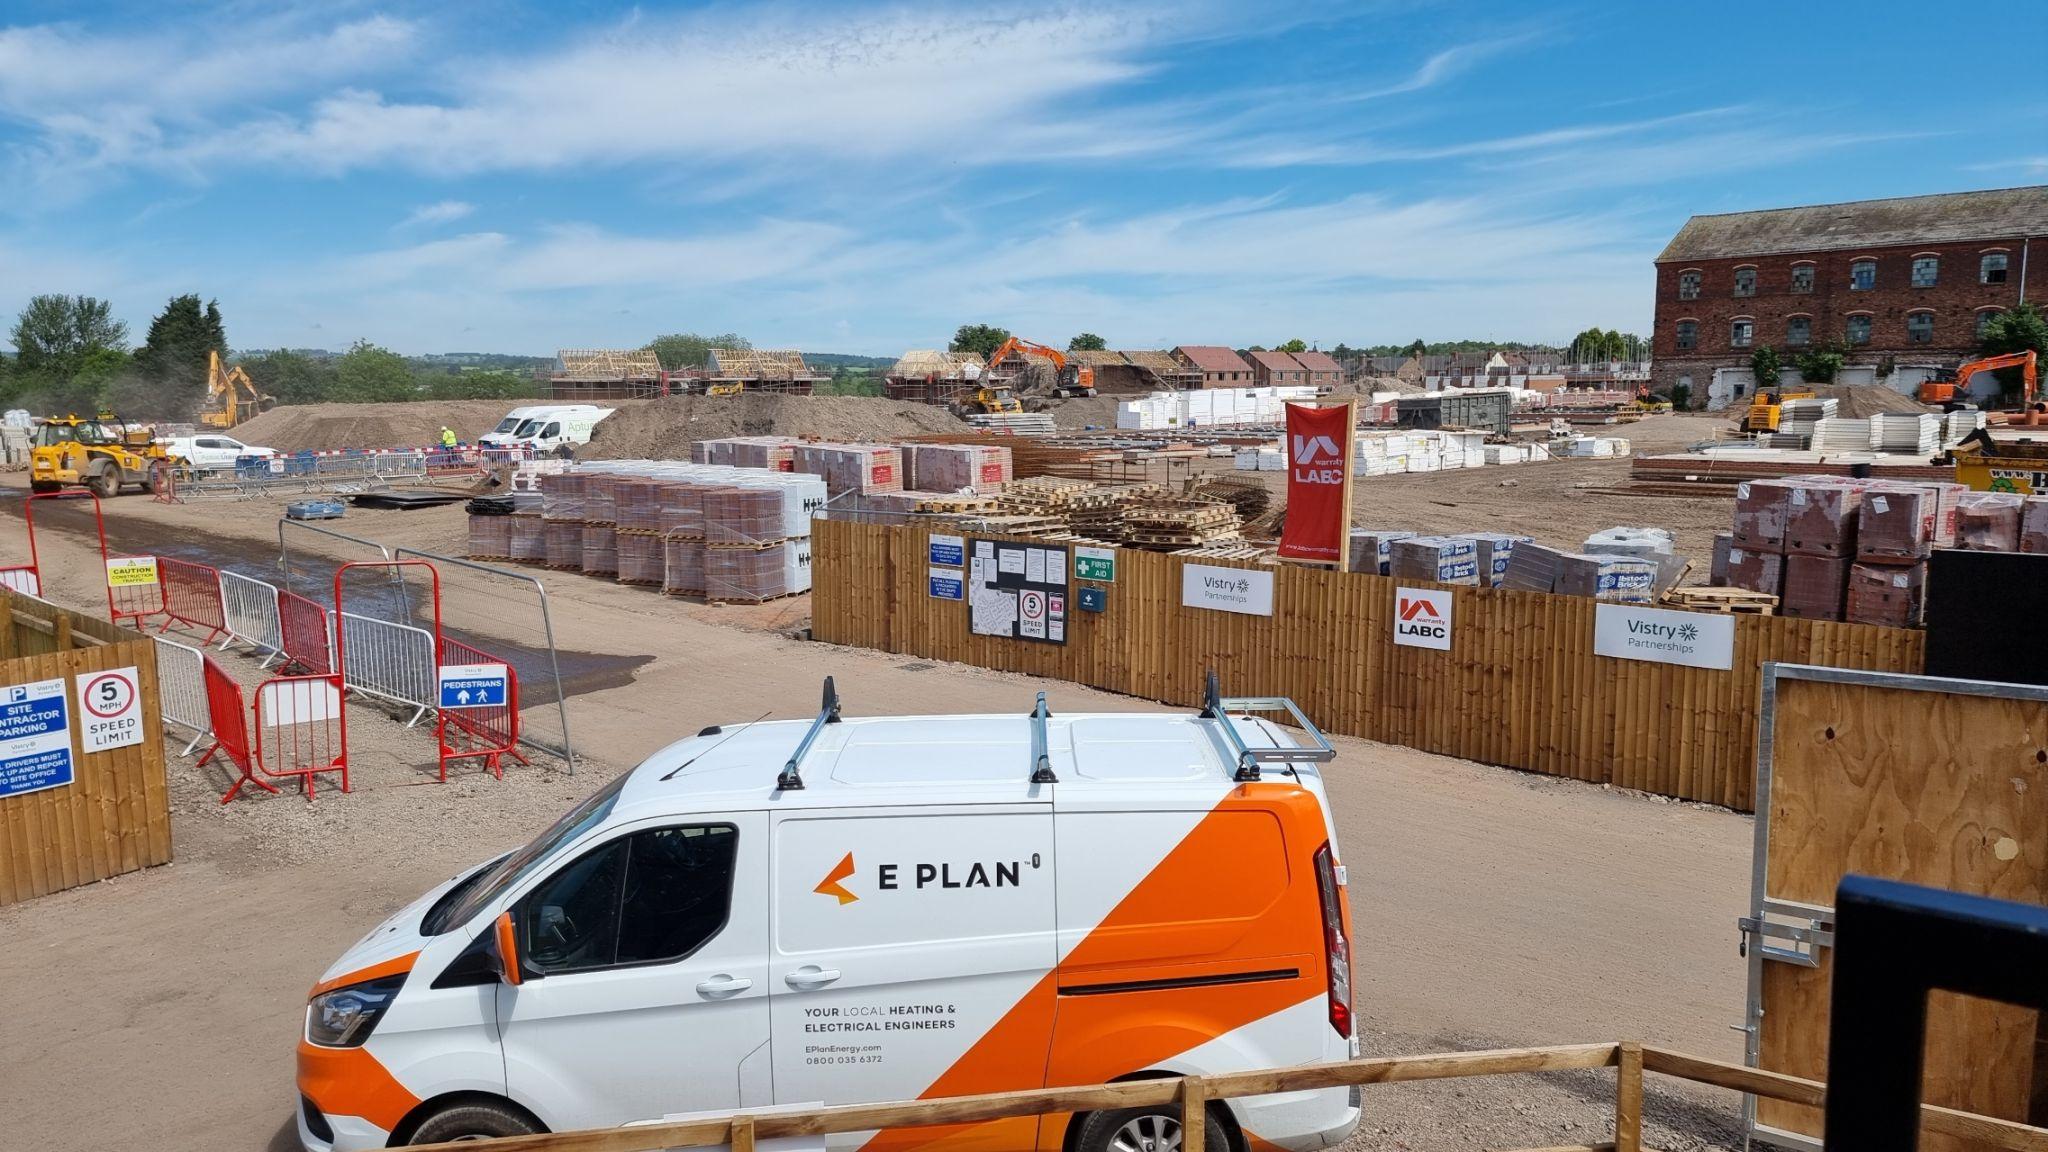 EPLAN Commences Second Phase of Mechanical and Electrical Installations for Vistry Homes in Redhill